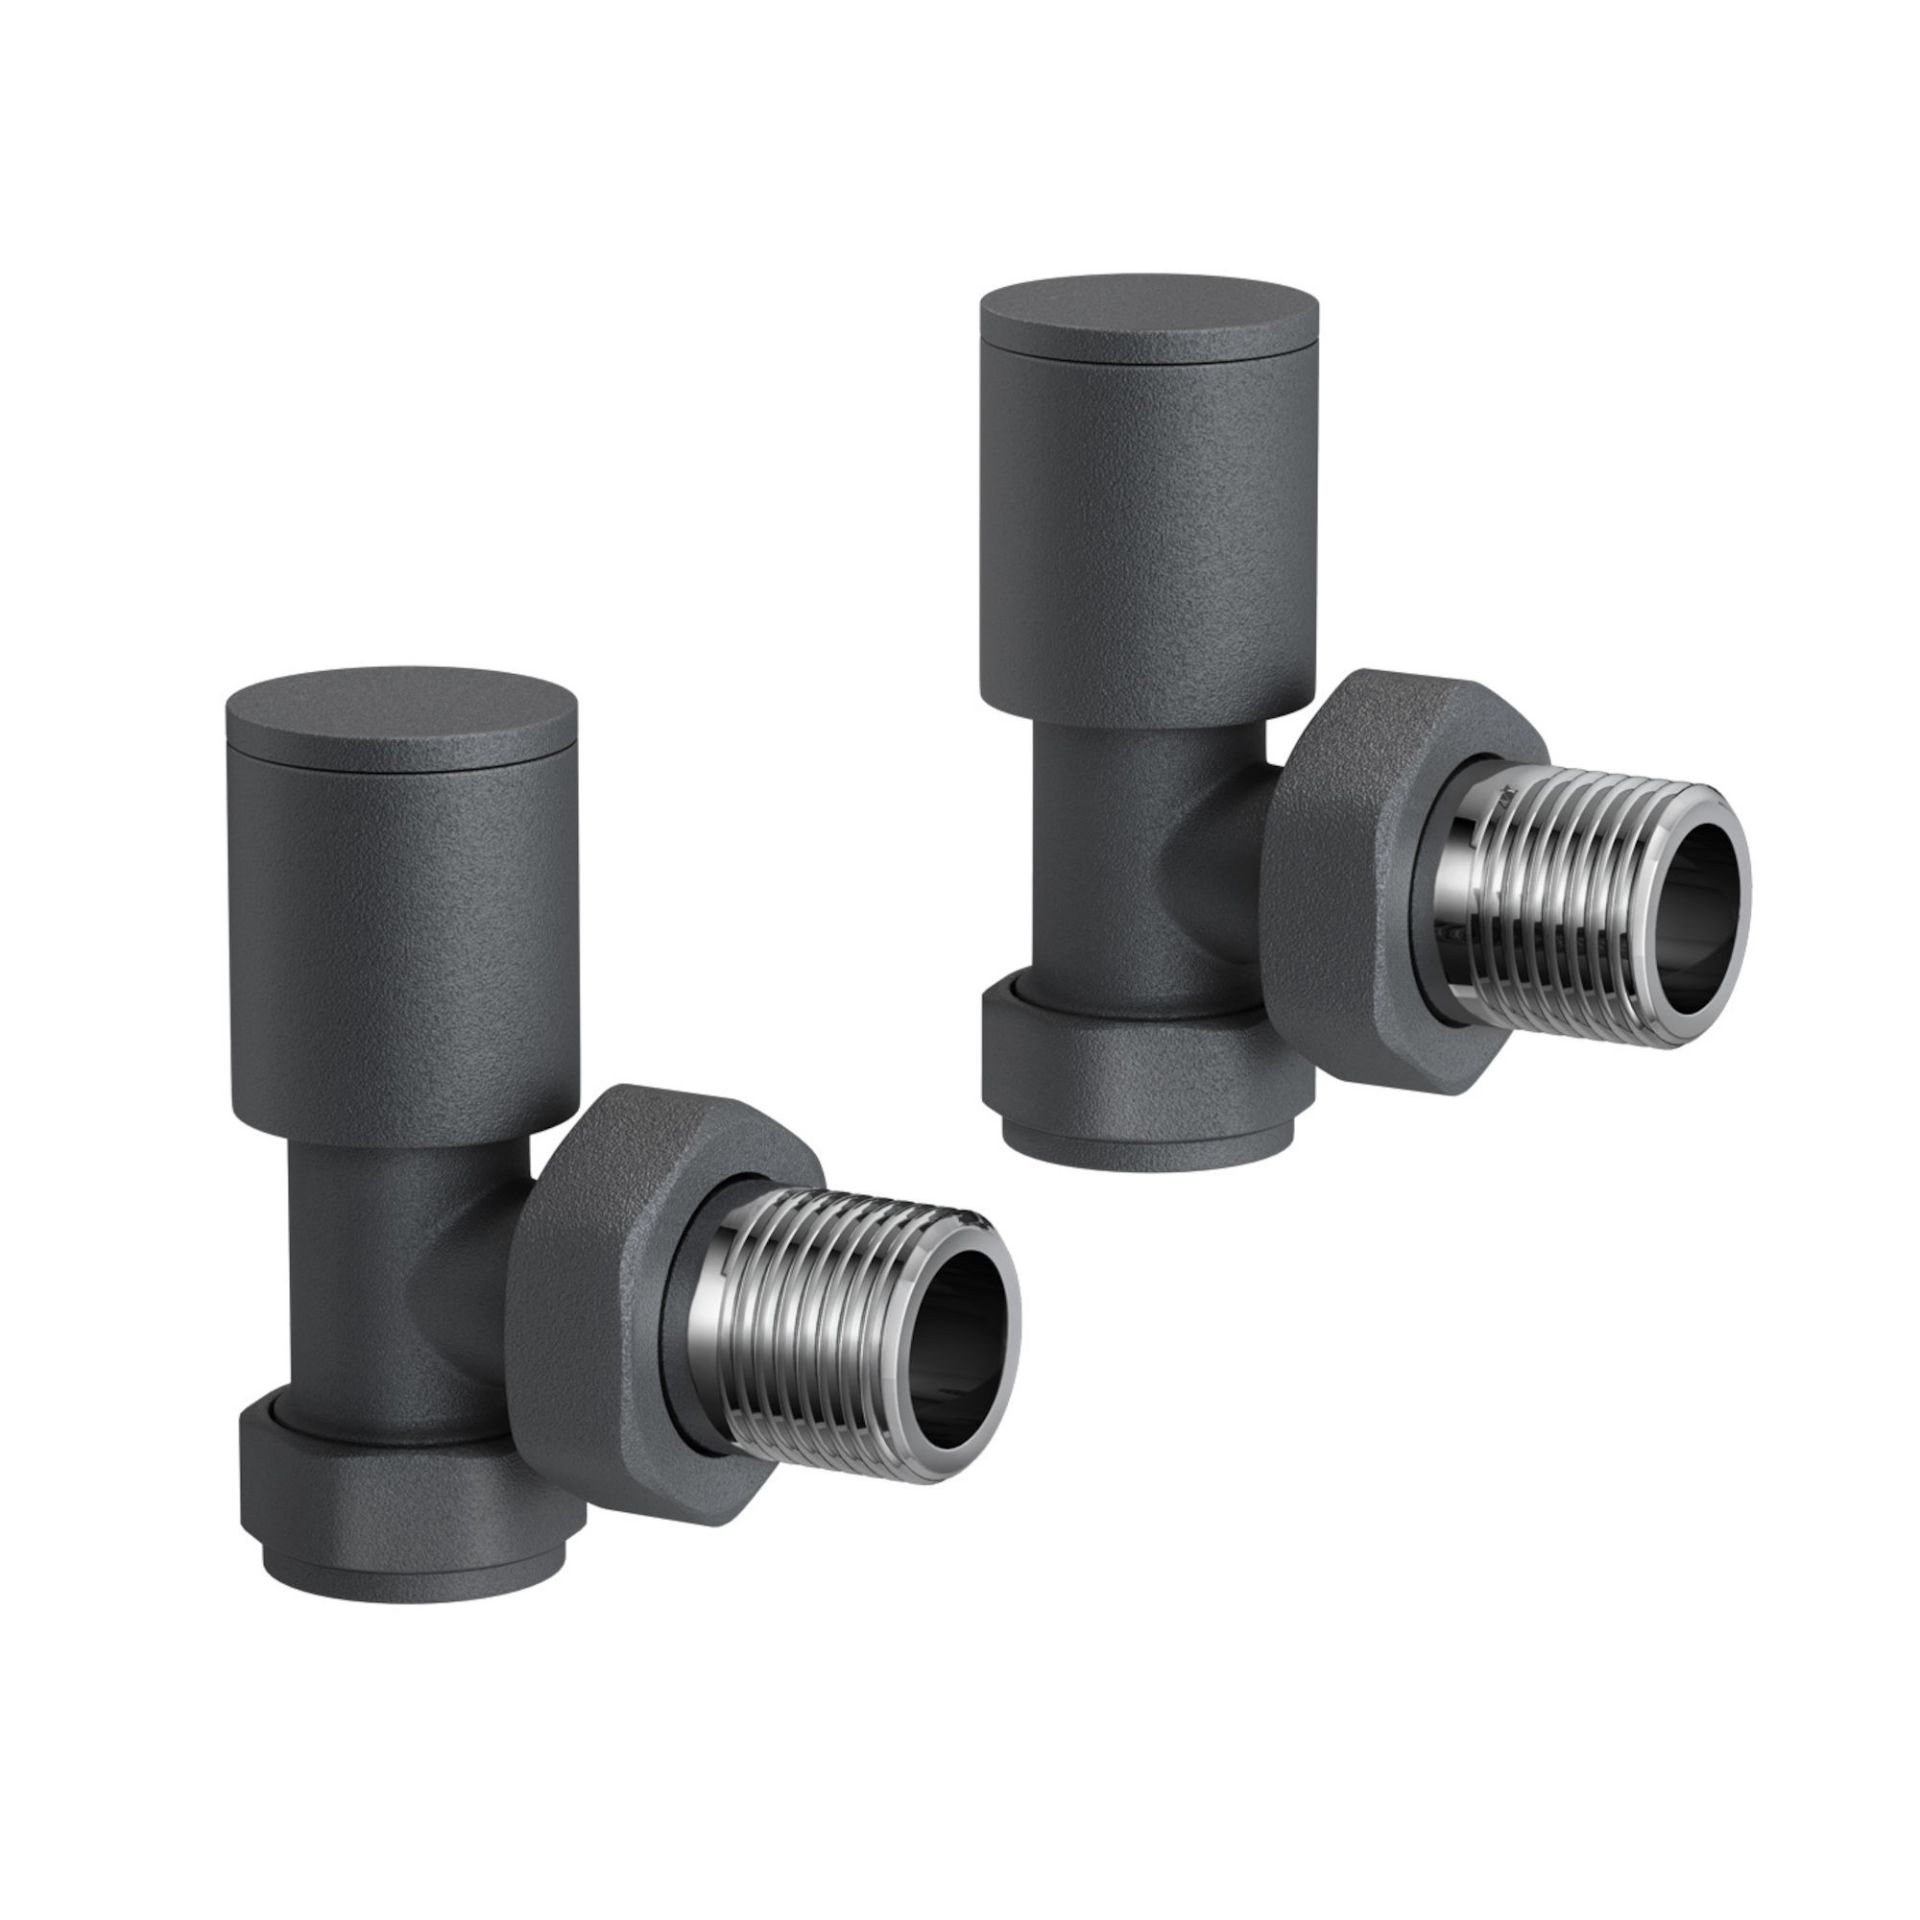 (NV1007) Anthracite Standard Connection Angled Radiator Valves 15mm Contemporary anthracite fi... - Image 2 of 3